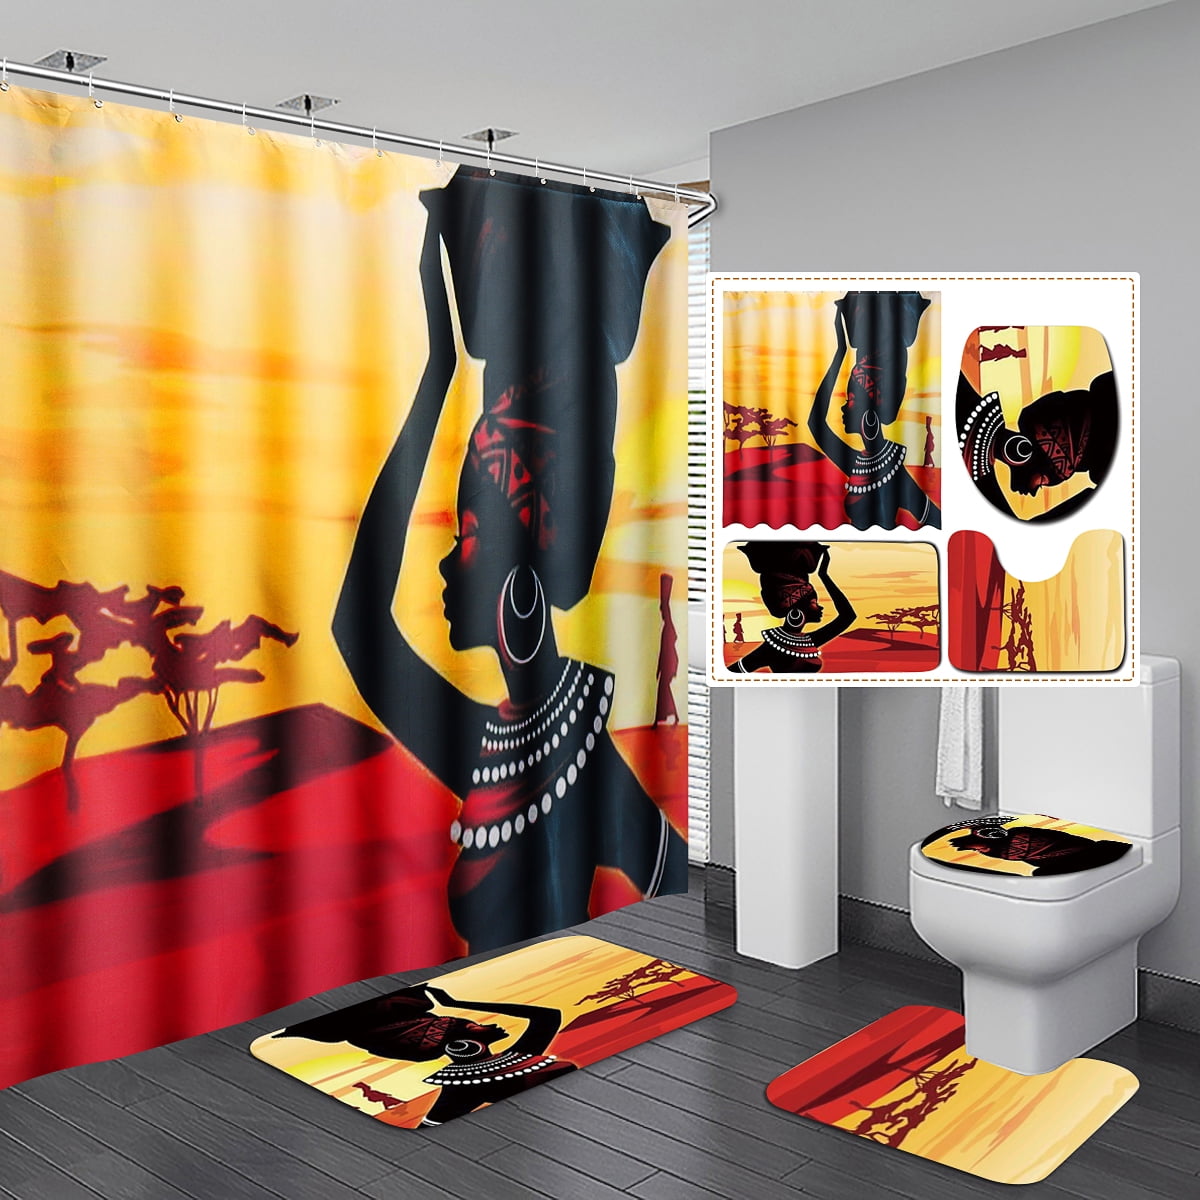 Details about   Asia Shower Curtain Fabric Bathroom Decor Set with Hooks 4 Sizes 